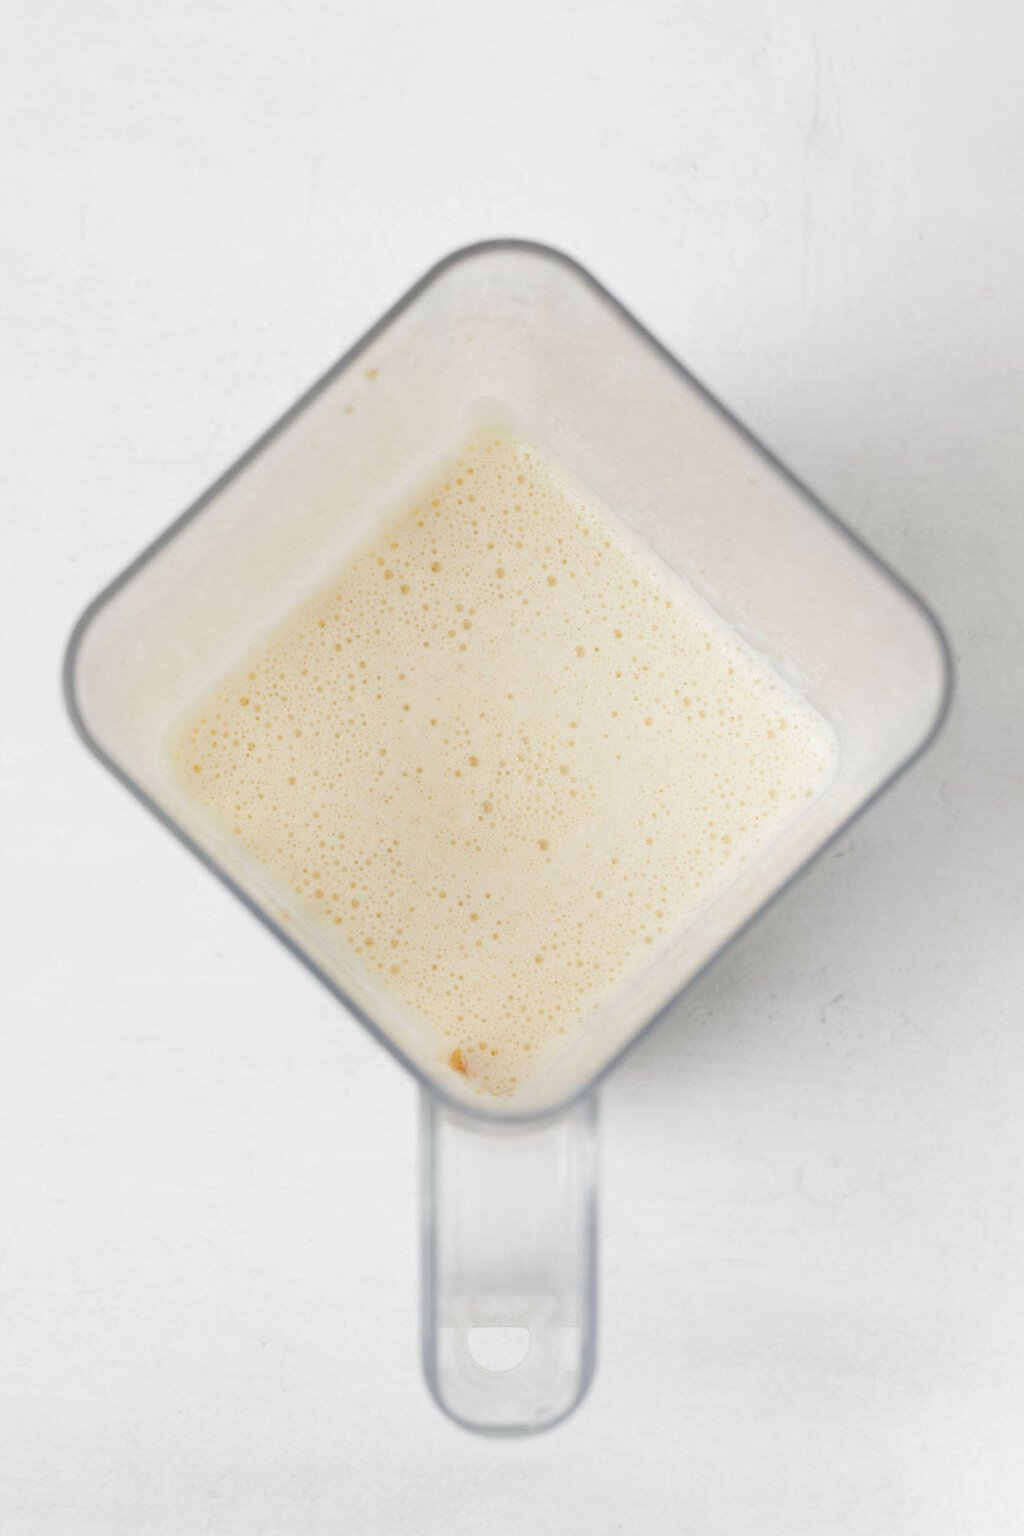 Non-dairy milk is pictured from overhead in the square container of a standing blender.